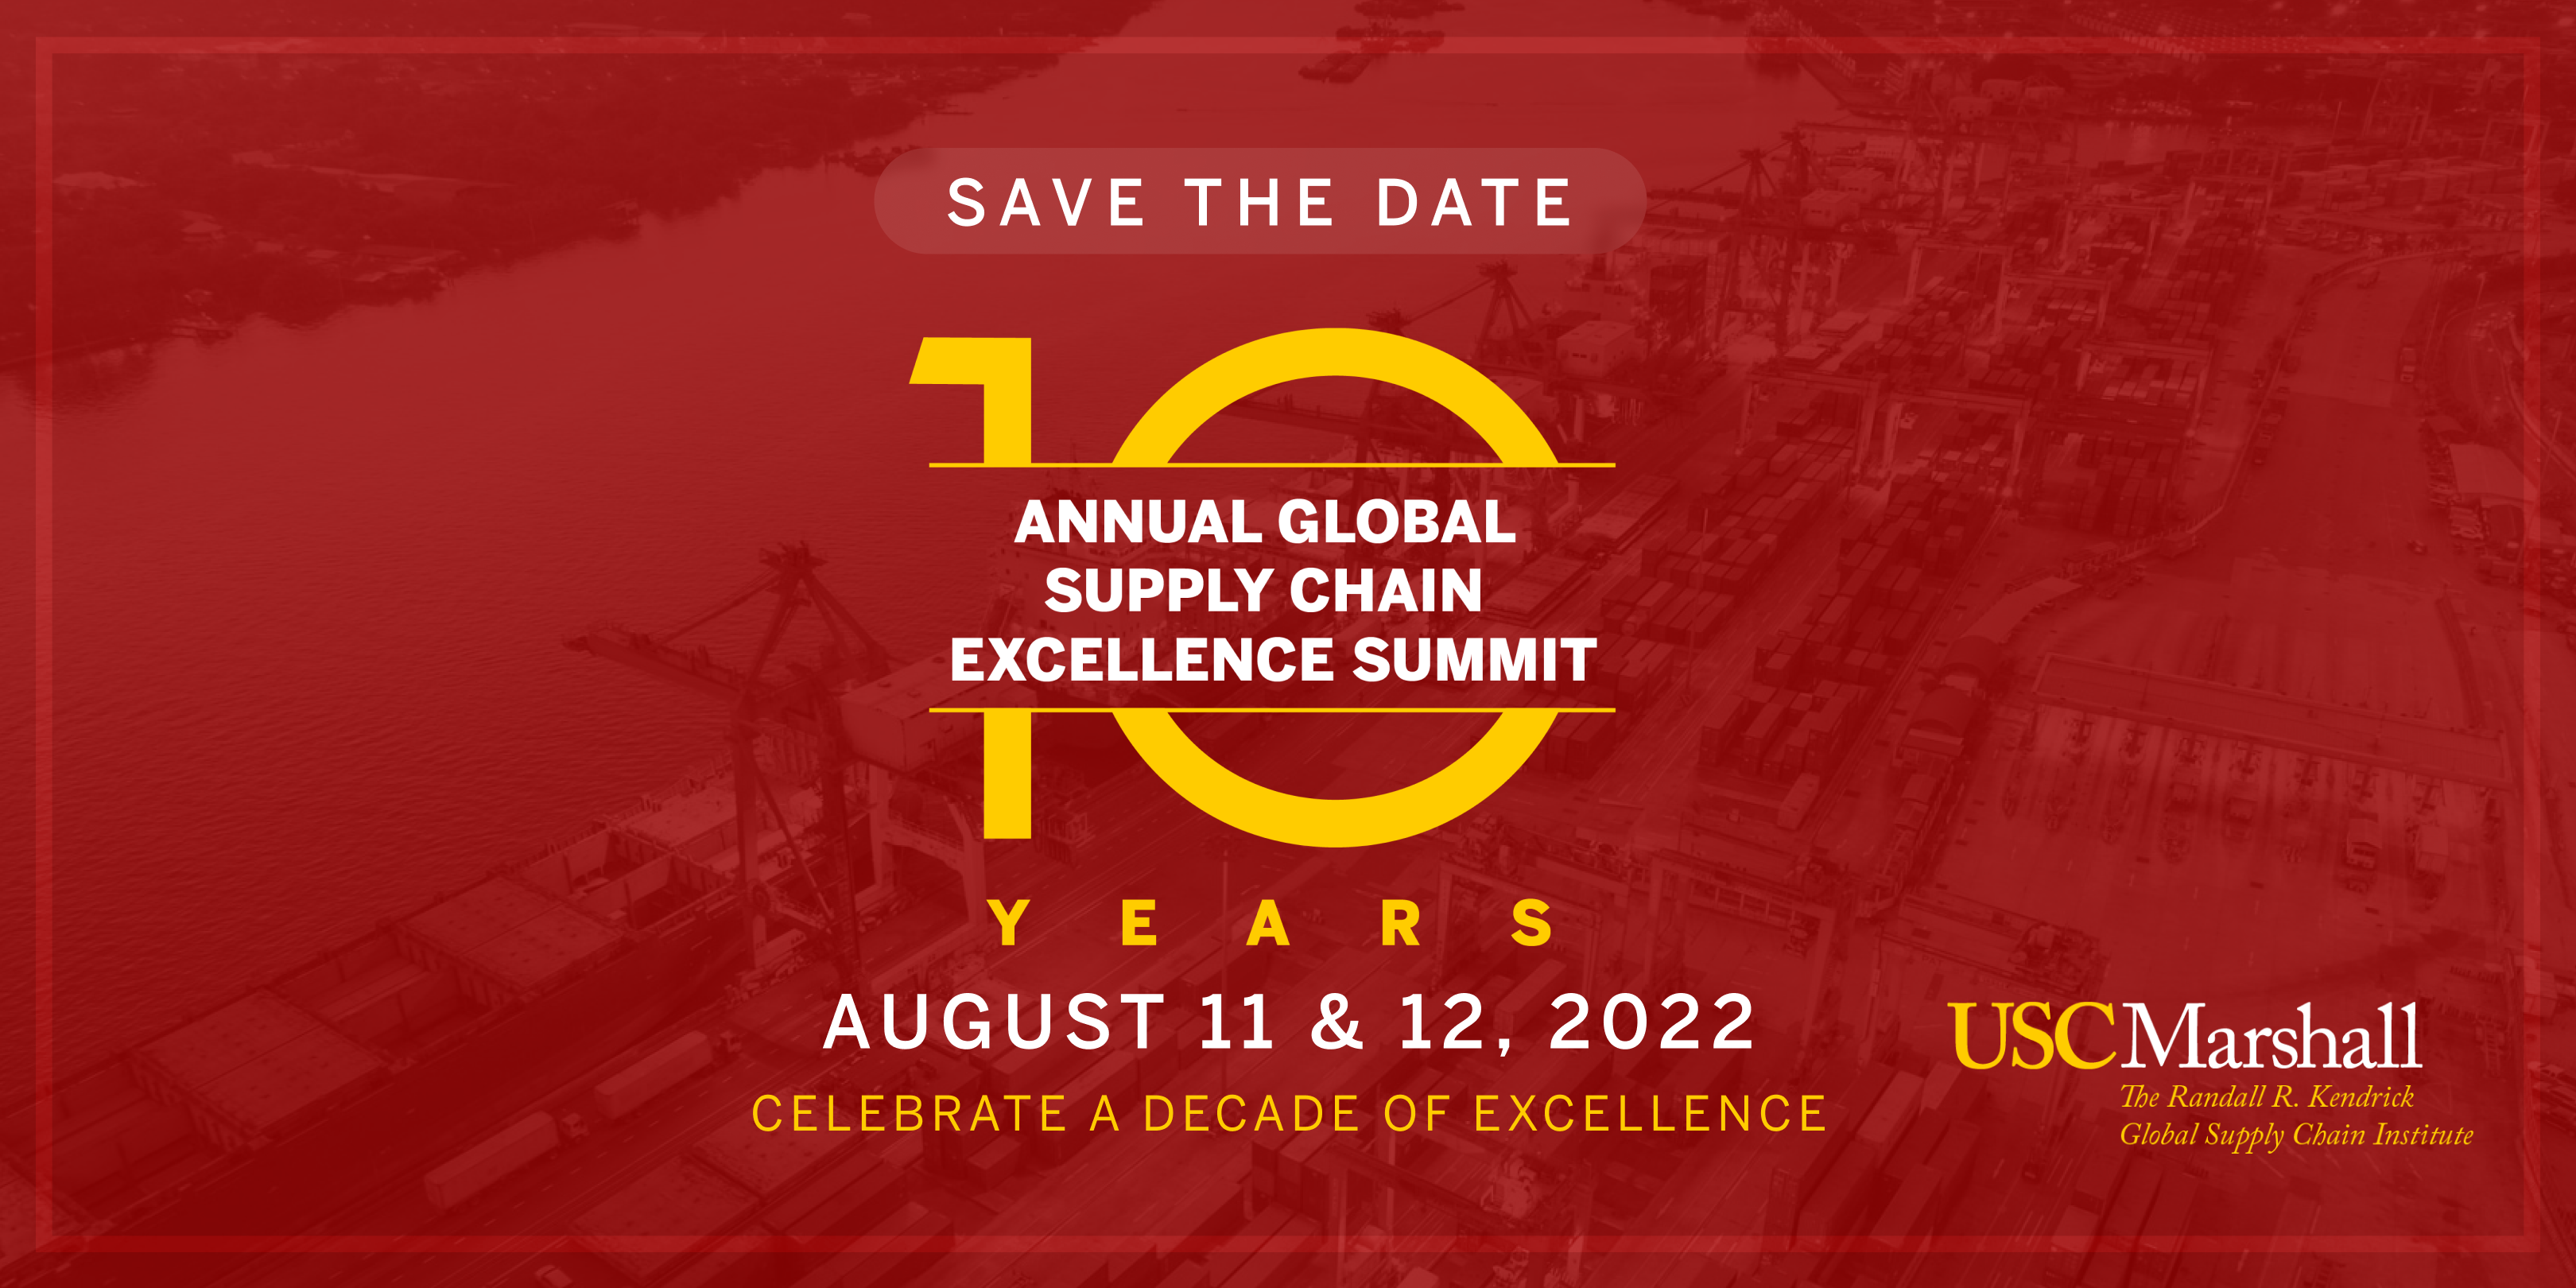 The 10th Annual Global Supply Chain Excellence Summit by USC Marshall Randall R. Kendrick Global Supply Chain Institute